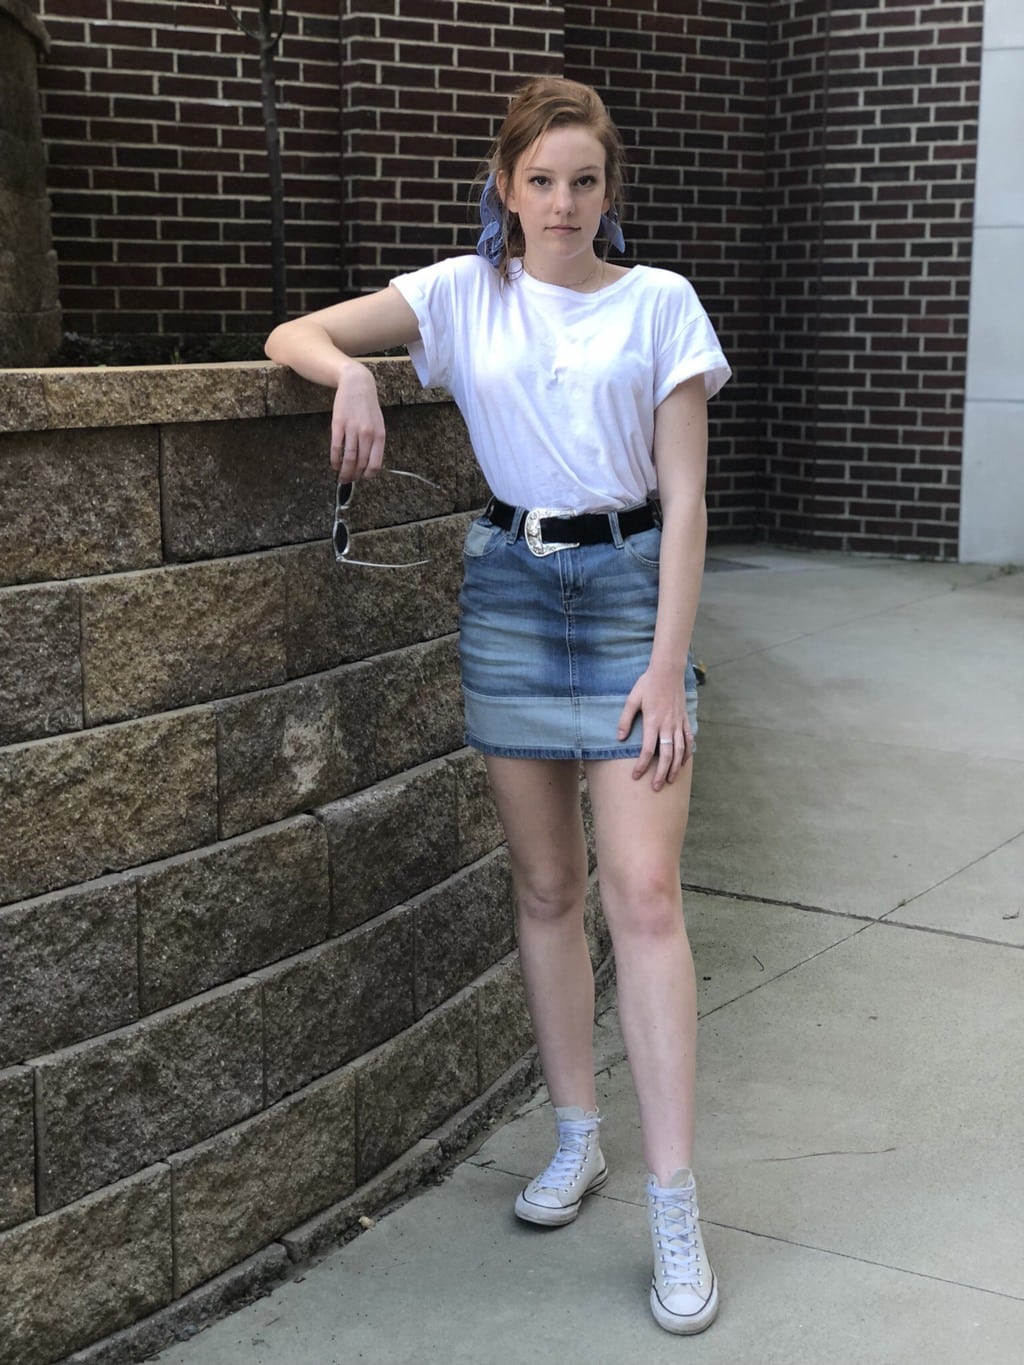 Emily wears a loose-fitted plain white tee tucked into a two-toned denim high-waisted skirt with a black belt and a thick silver western buckle. She pairs it with a blue bandana tied around her ponytail and high-top light grey converse sneakers.